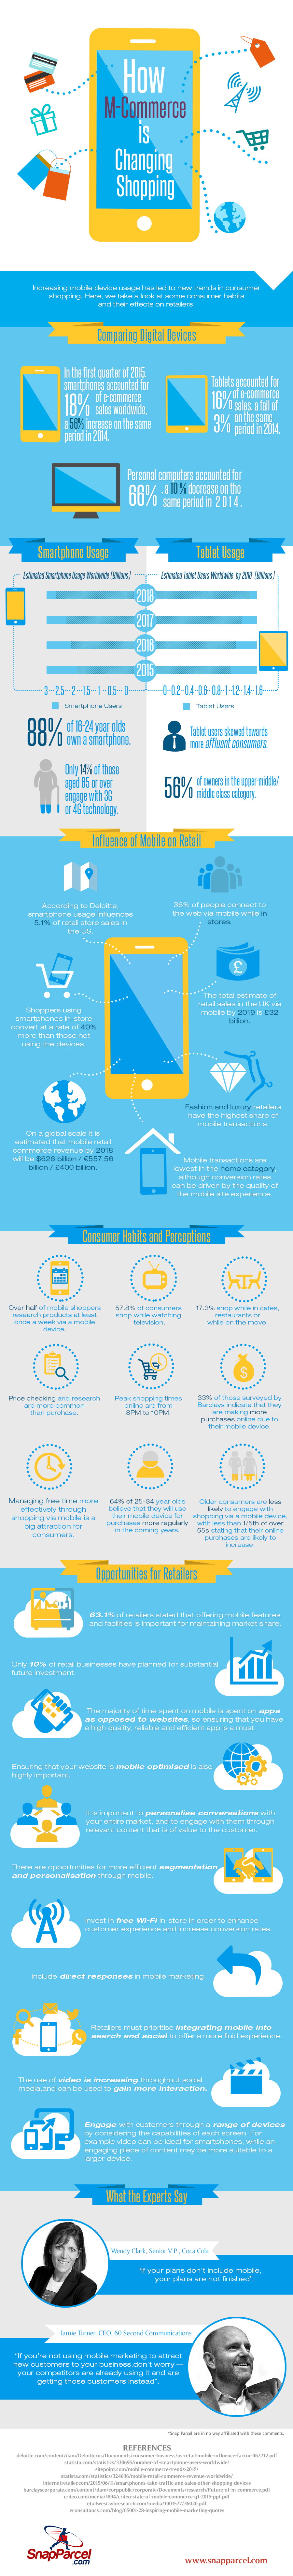 M-Commerce-is-Transforming-Retail-Infographic